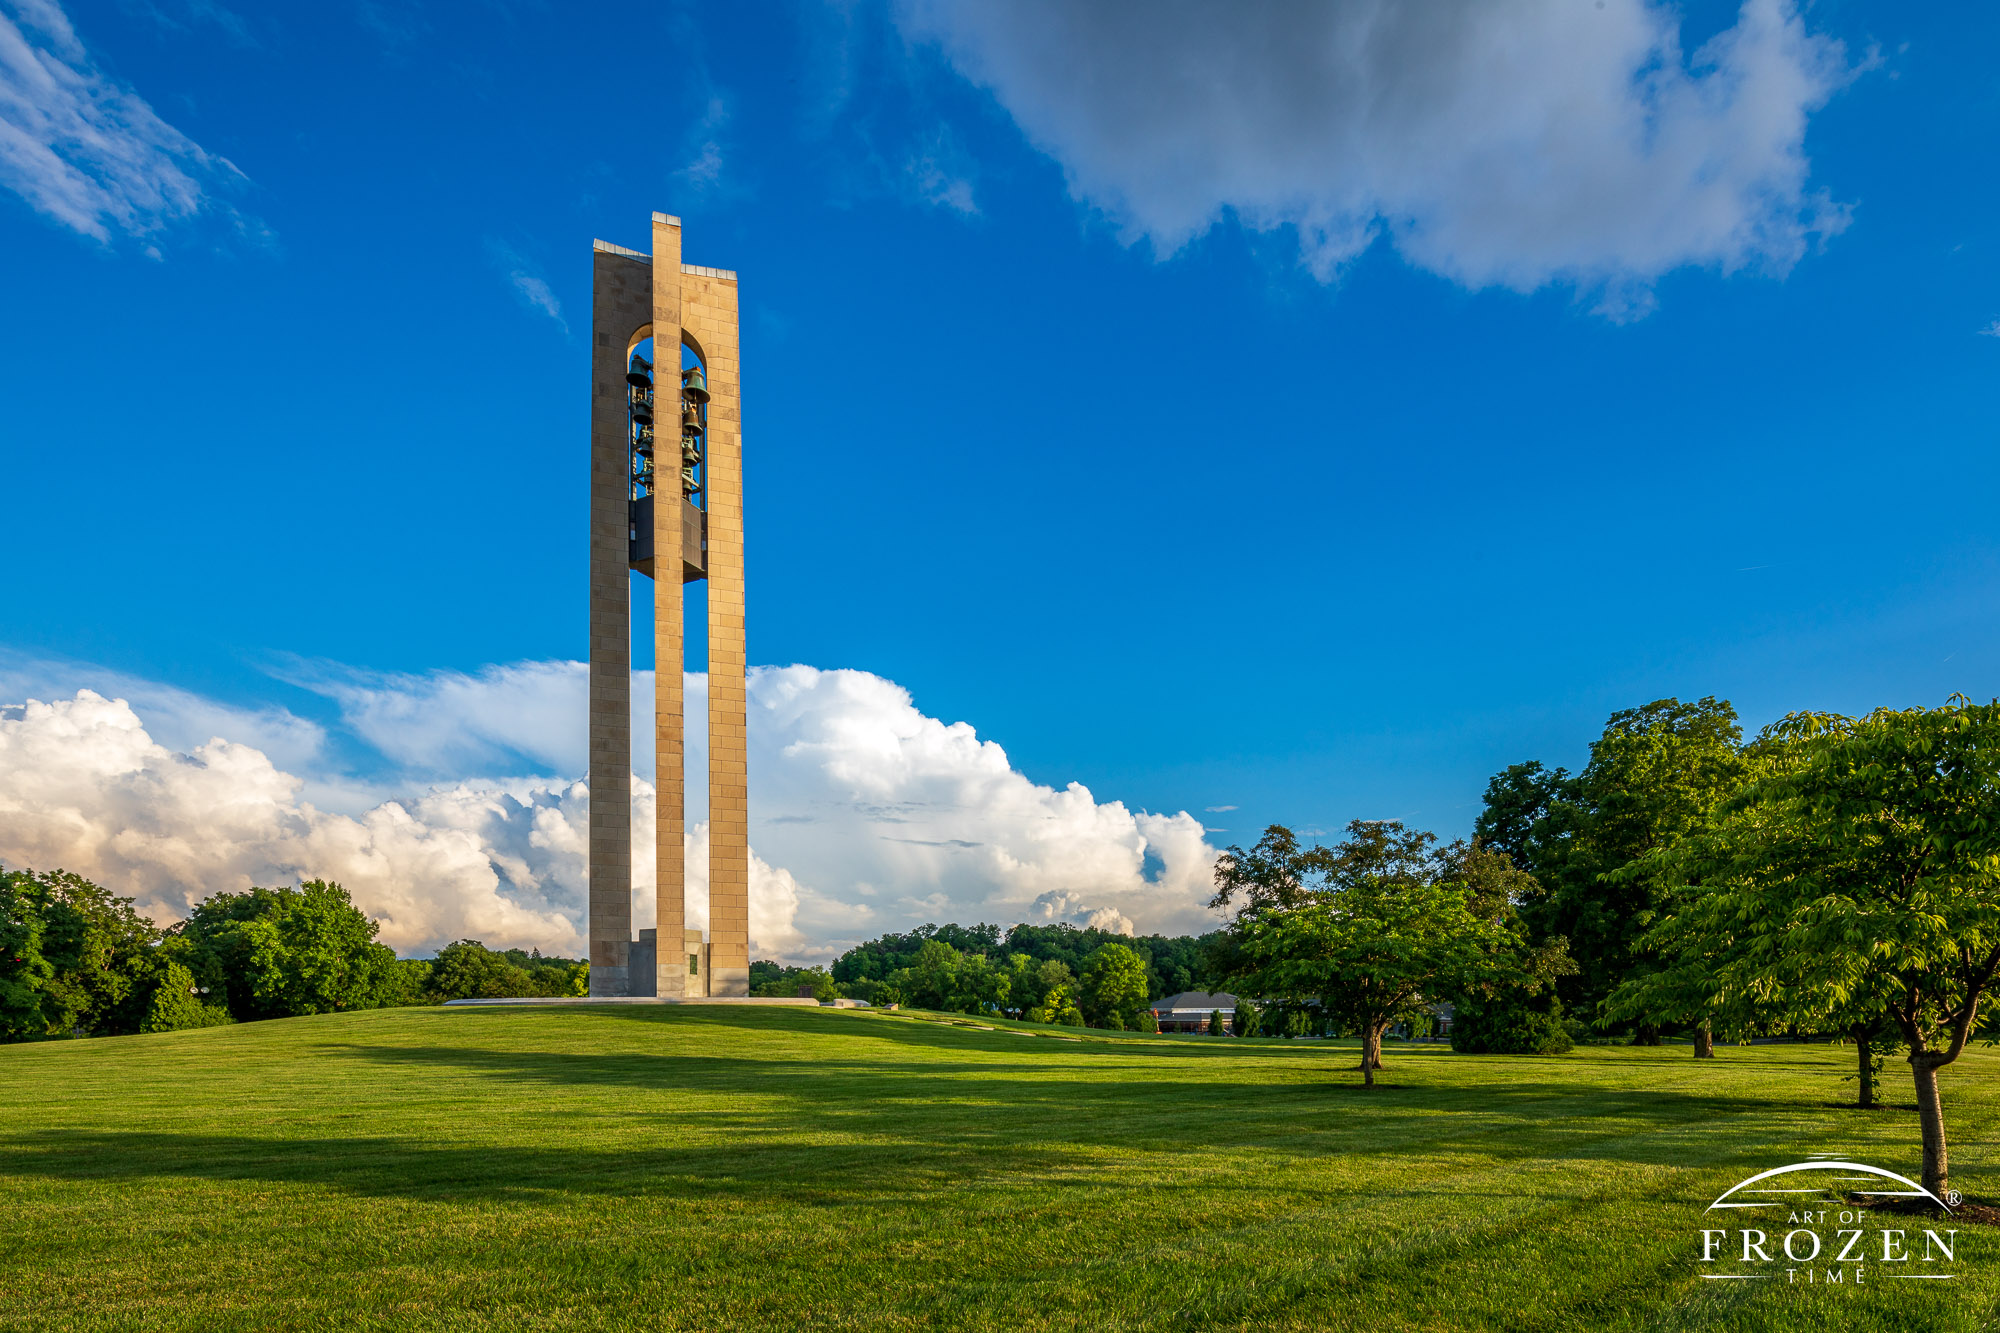 Deeds Carillon takes on warmer colors in this golden hour view of Dayton's Bell Tower as distant storms linger on the horizon